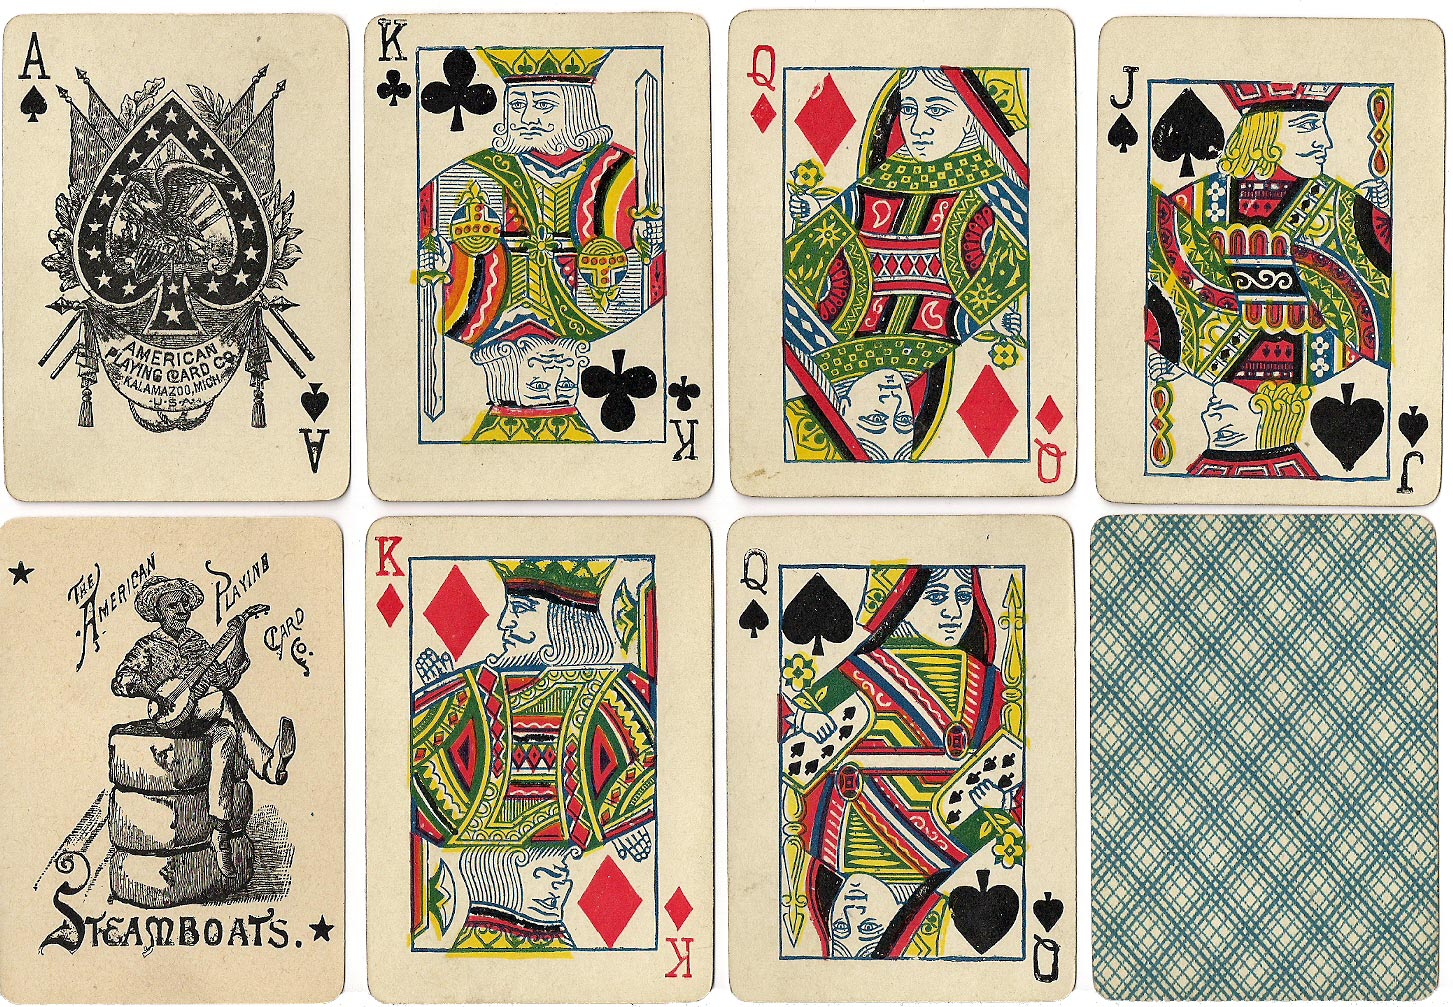 'Steamboats No.99' playing cards produced by the American Playing Card Co. of Kalamazoo, c.1890